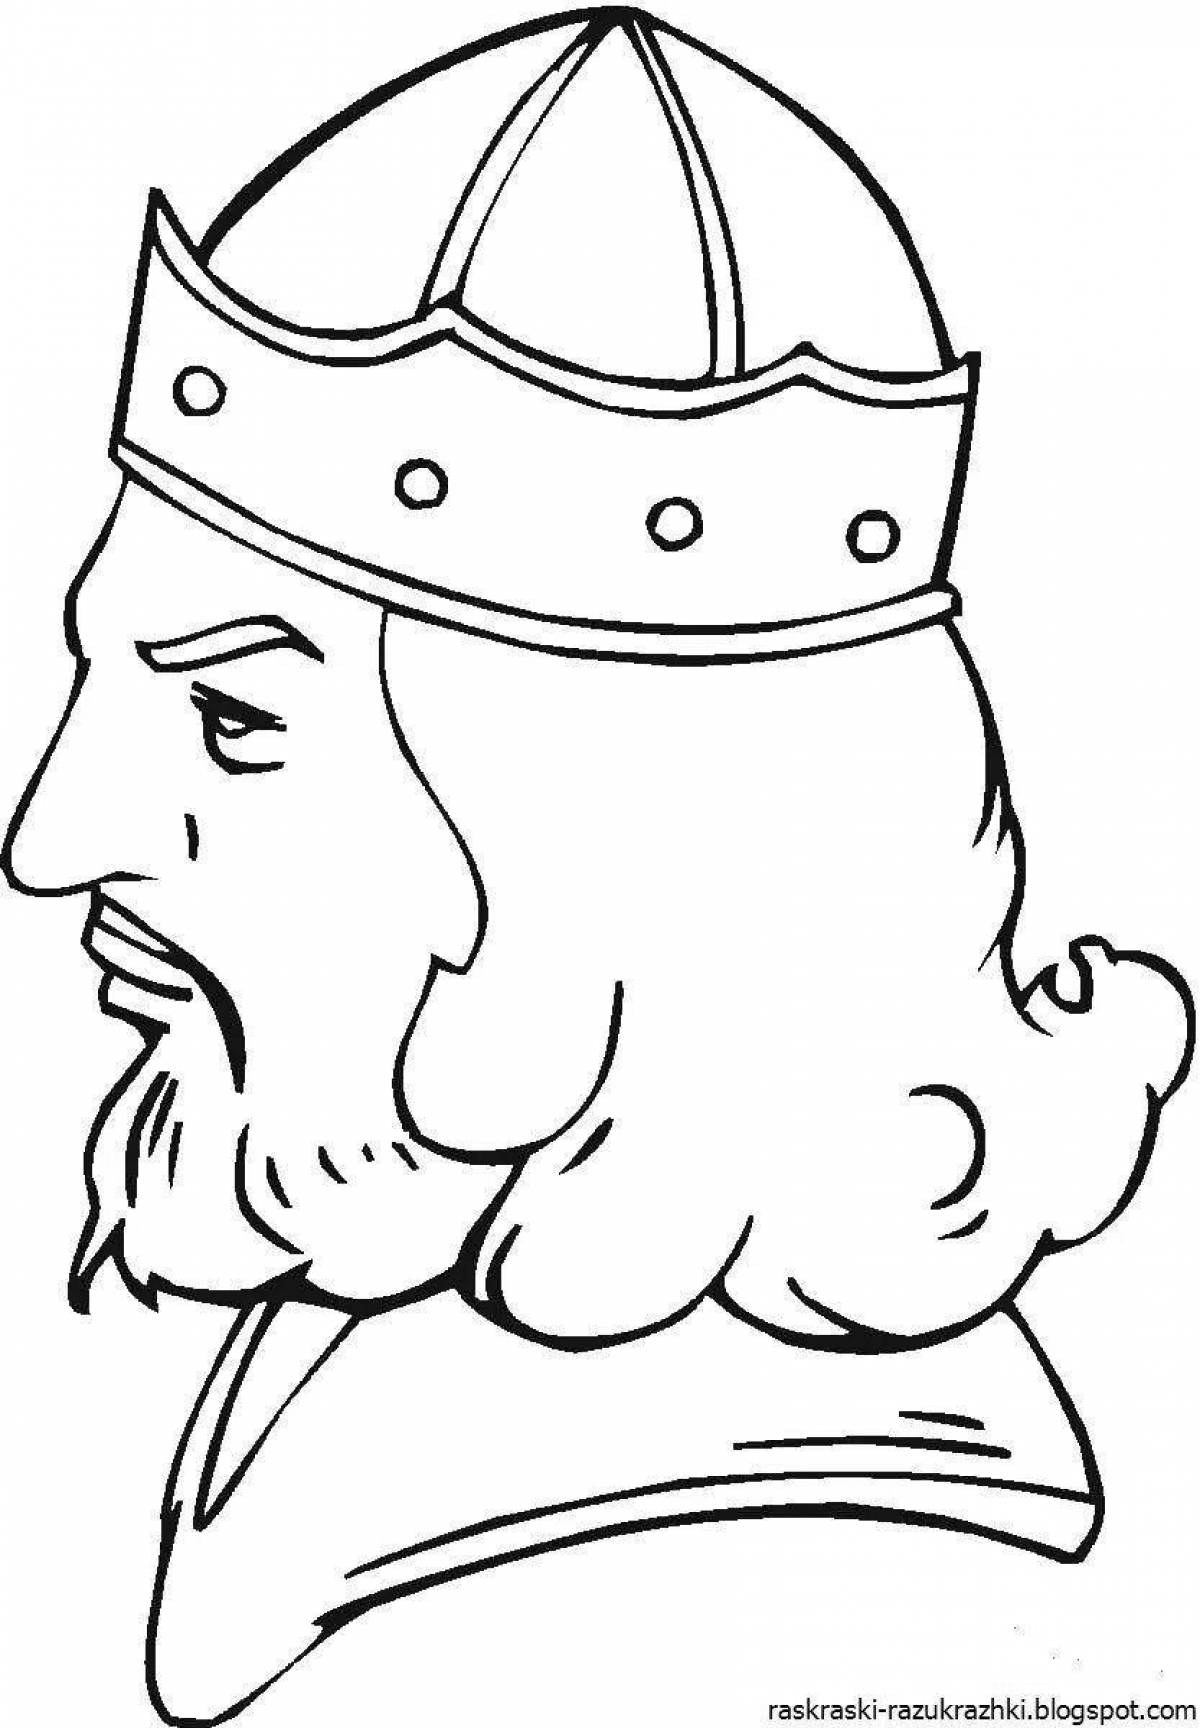 Royal king coloring book for kids